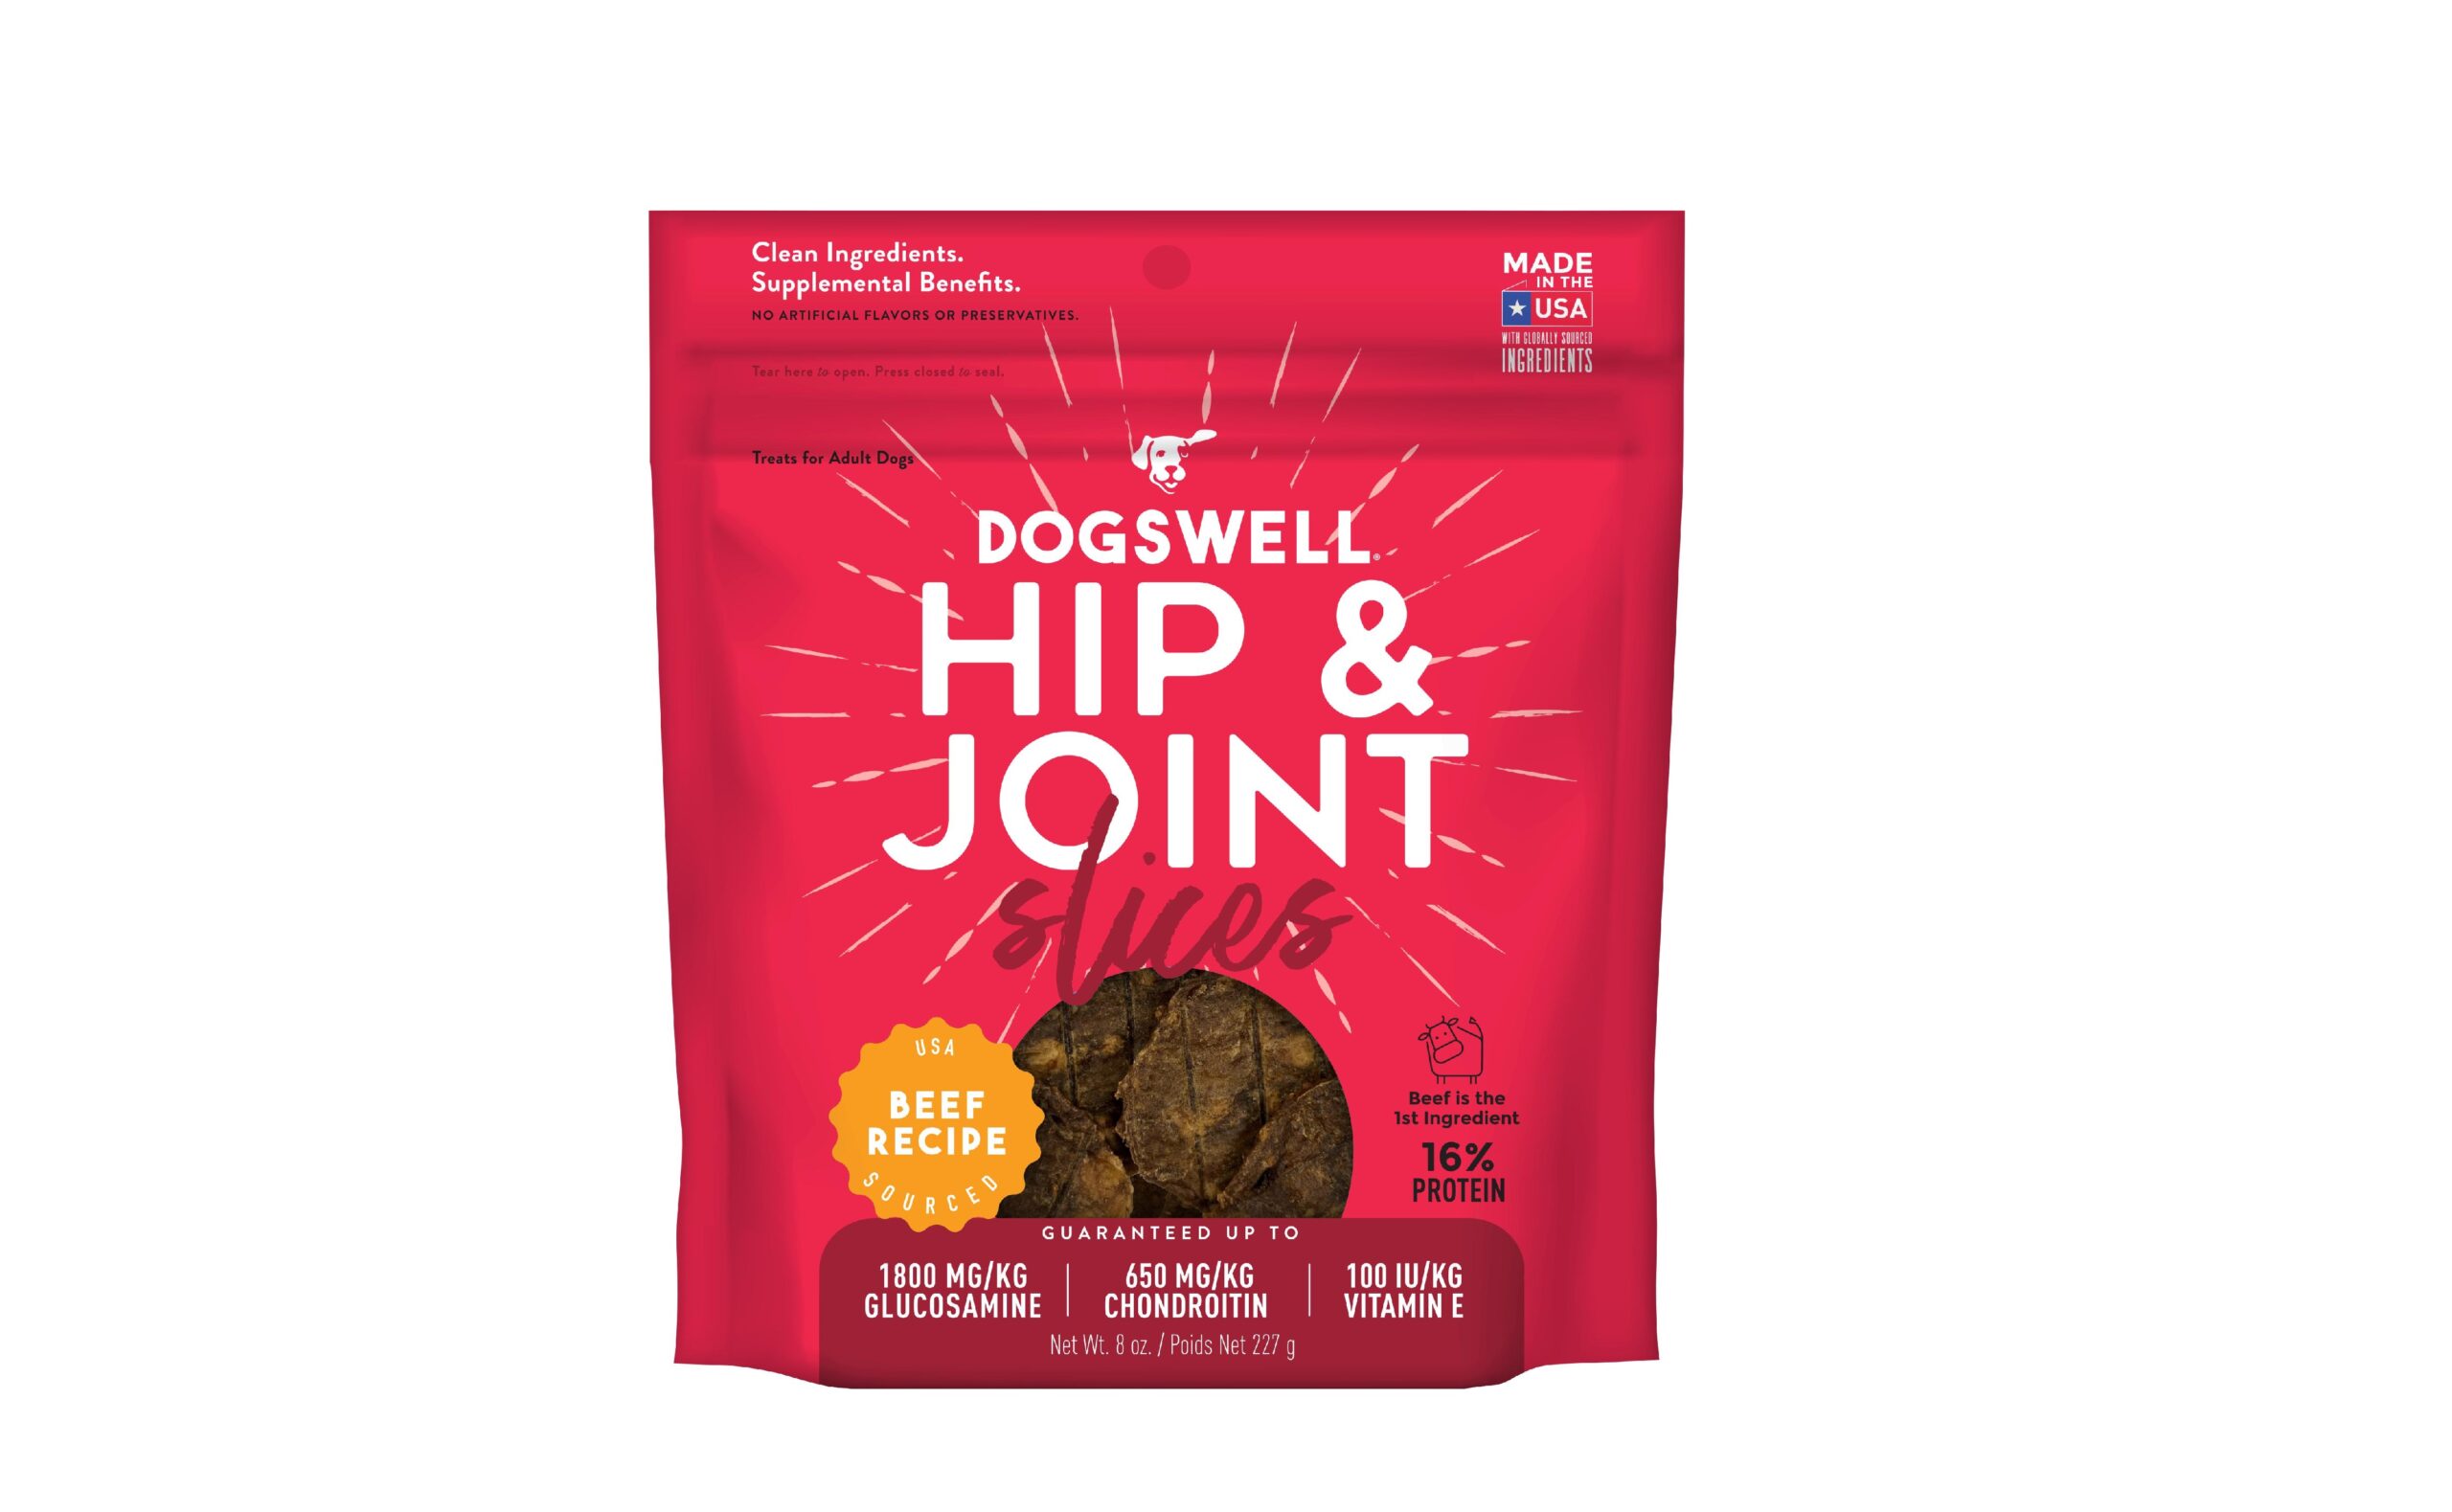 Dogswell Hip & Joint Slices | Pet Age